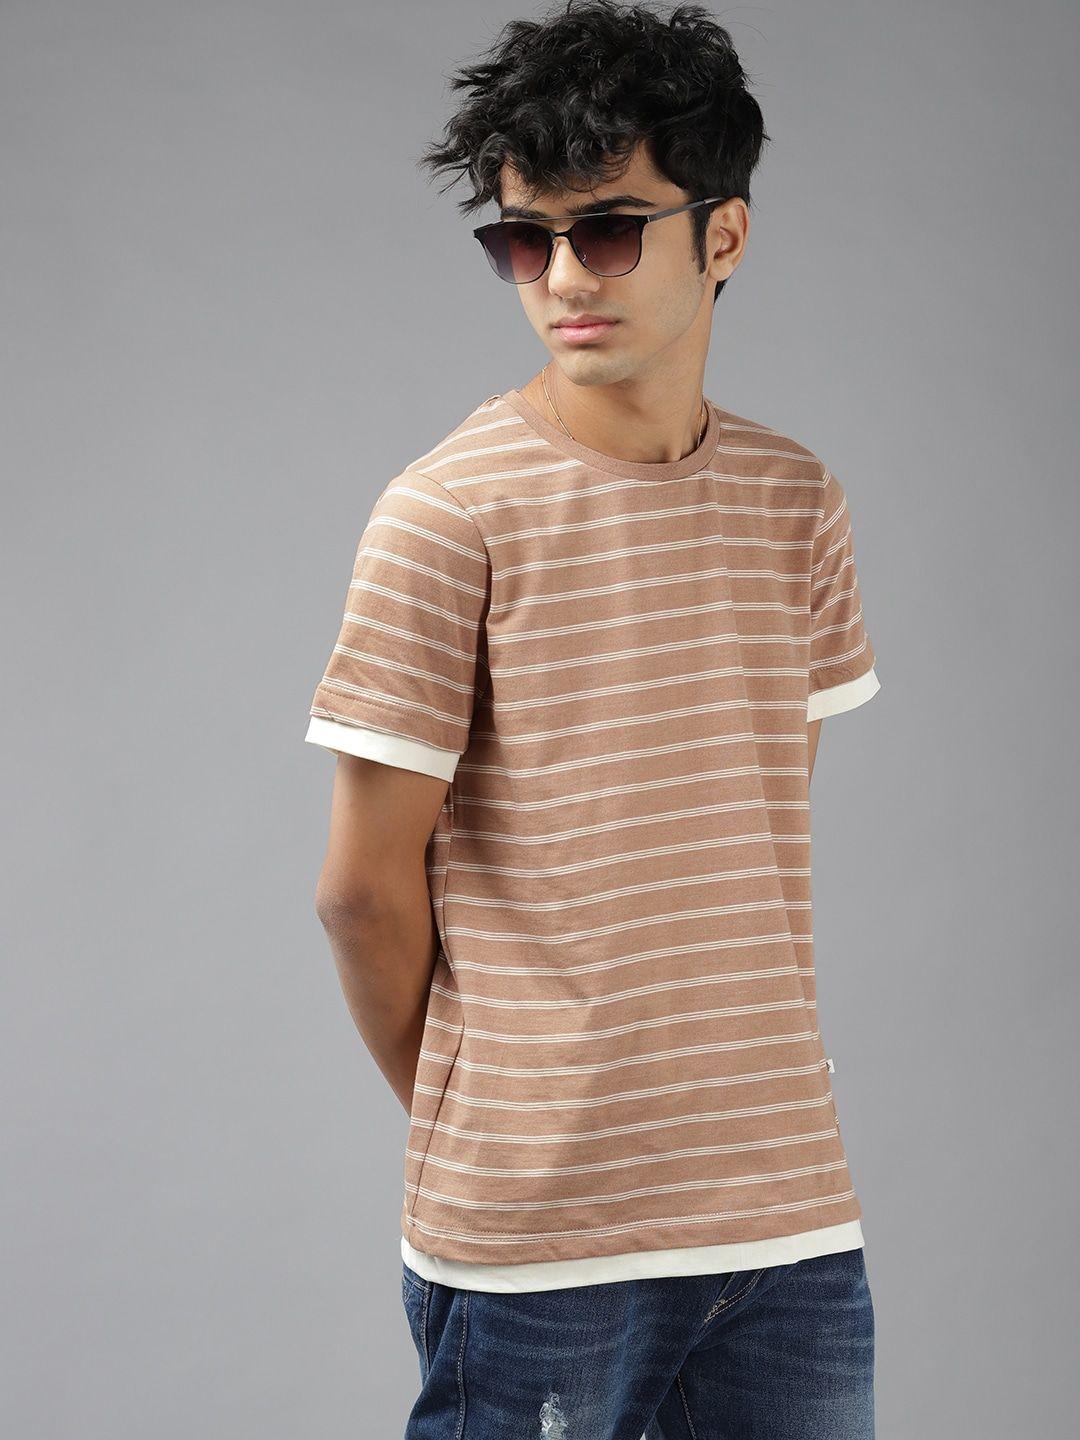 uth by roadster boys dusty pink with tinge of beige & white striped pure cotton t-shirt